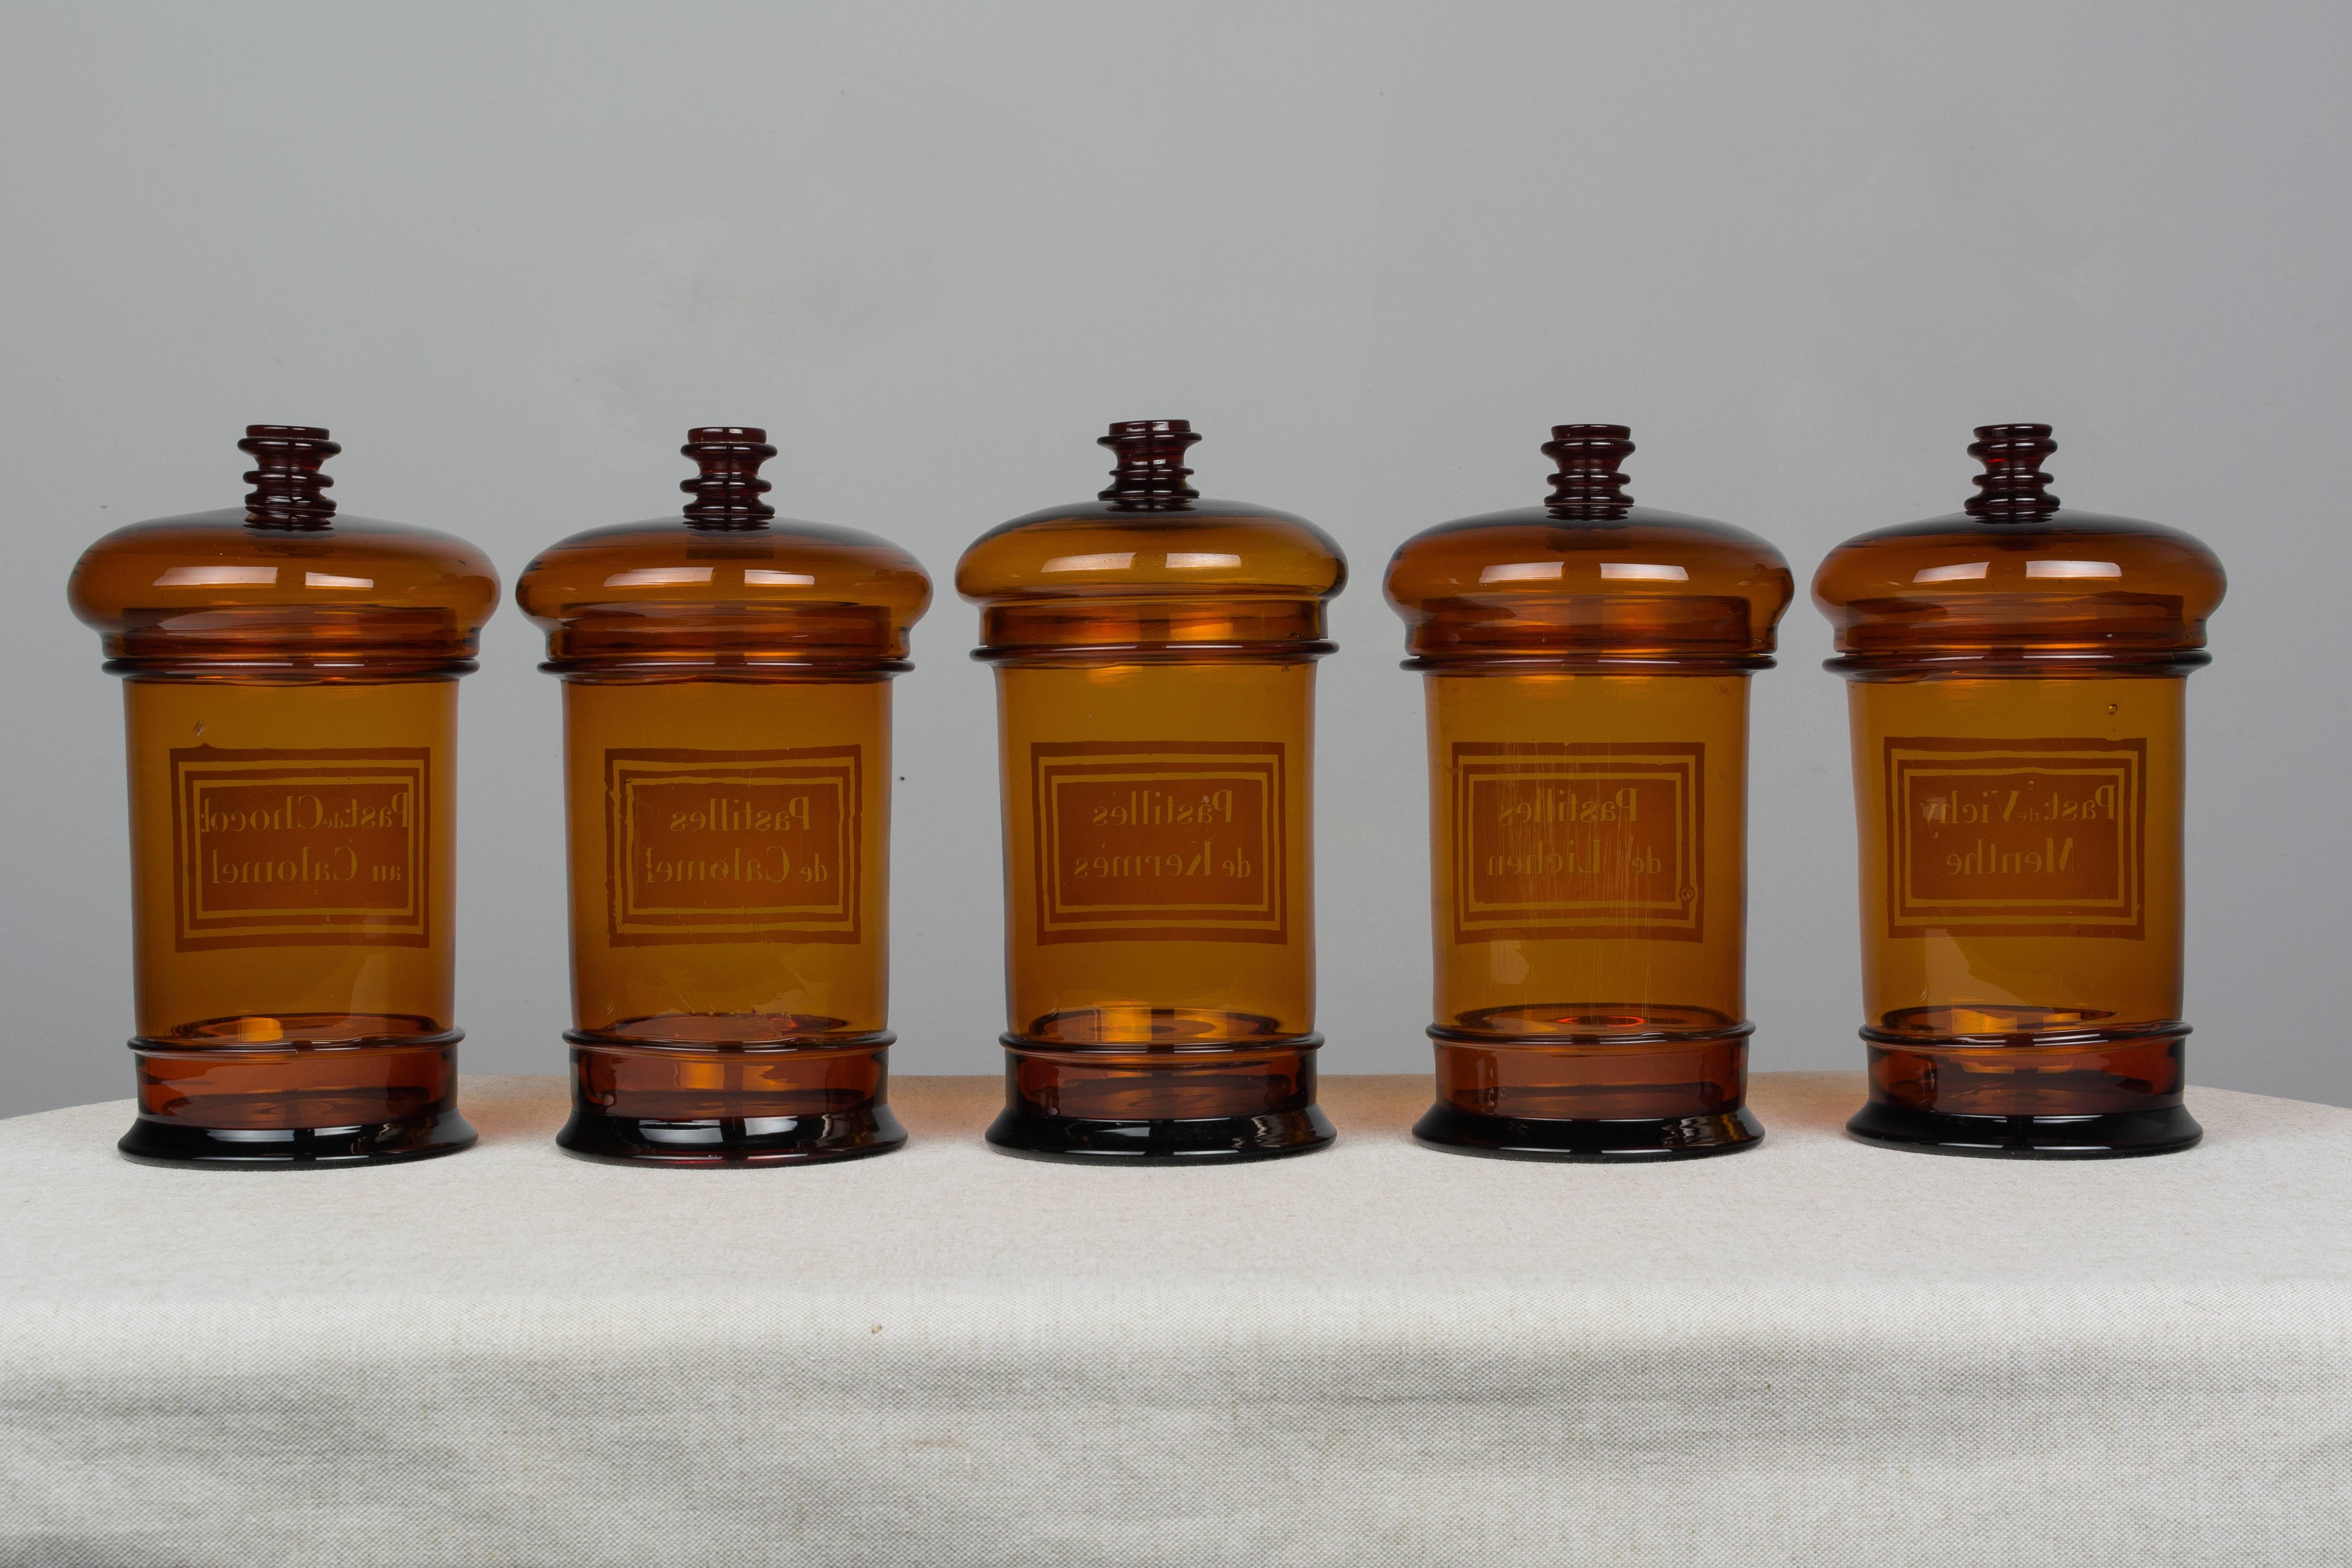 French Provincial Set of Five 19th Century French Apothecary Jars